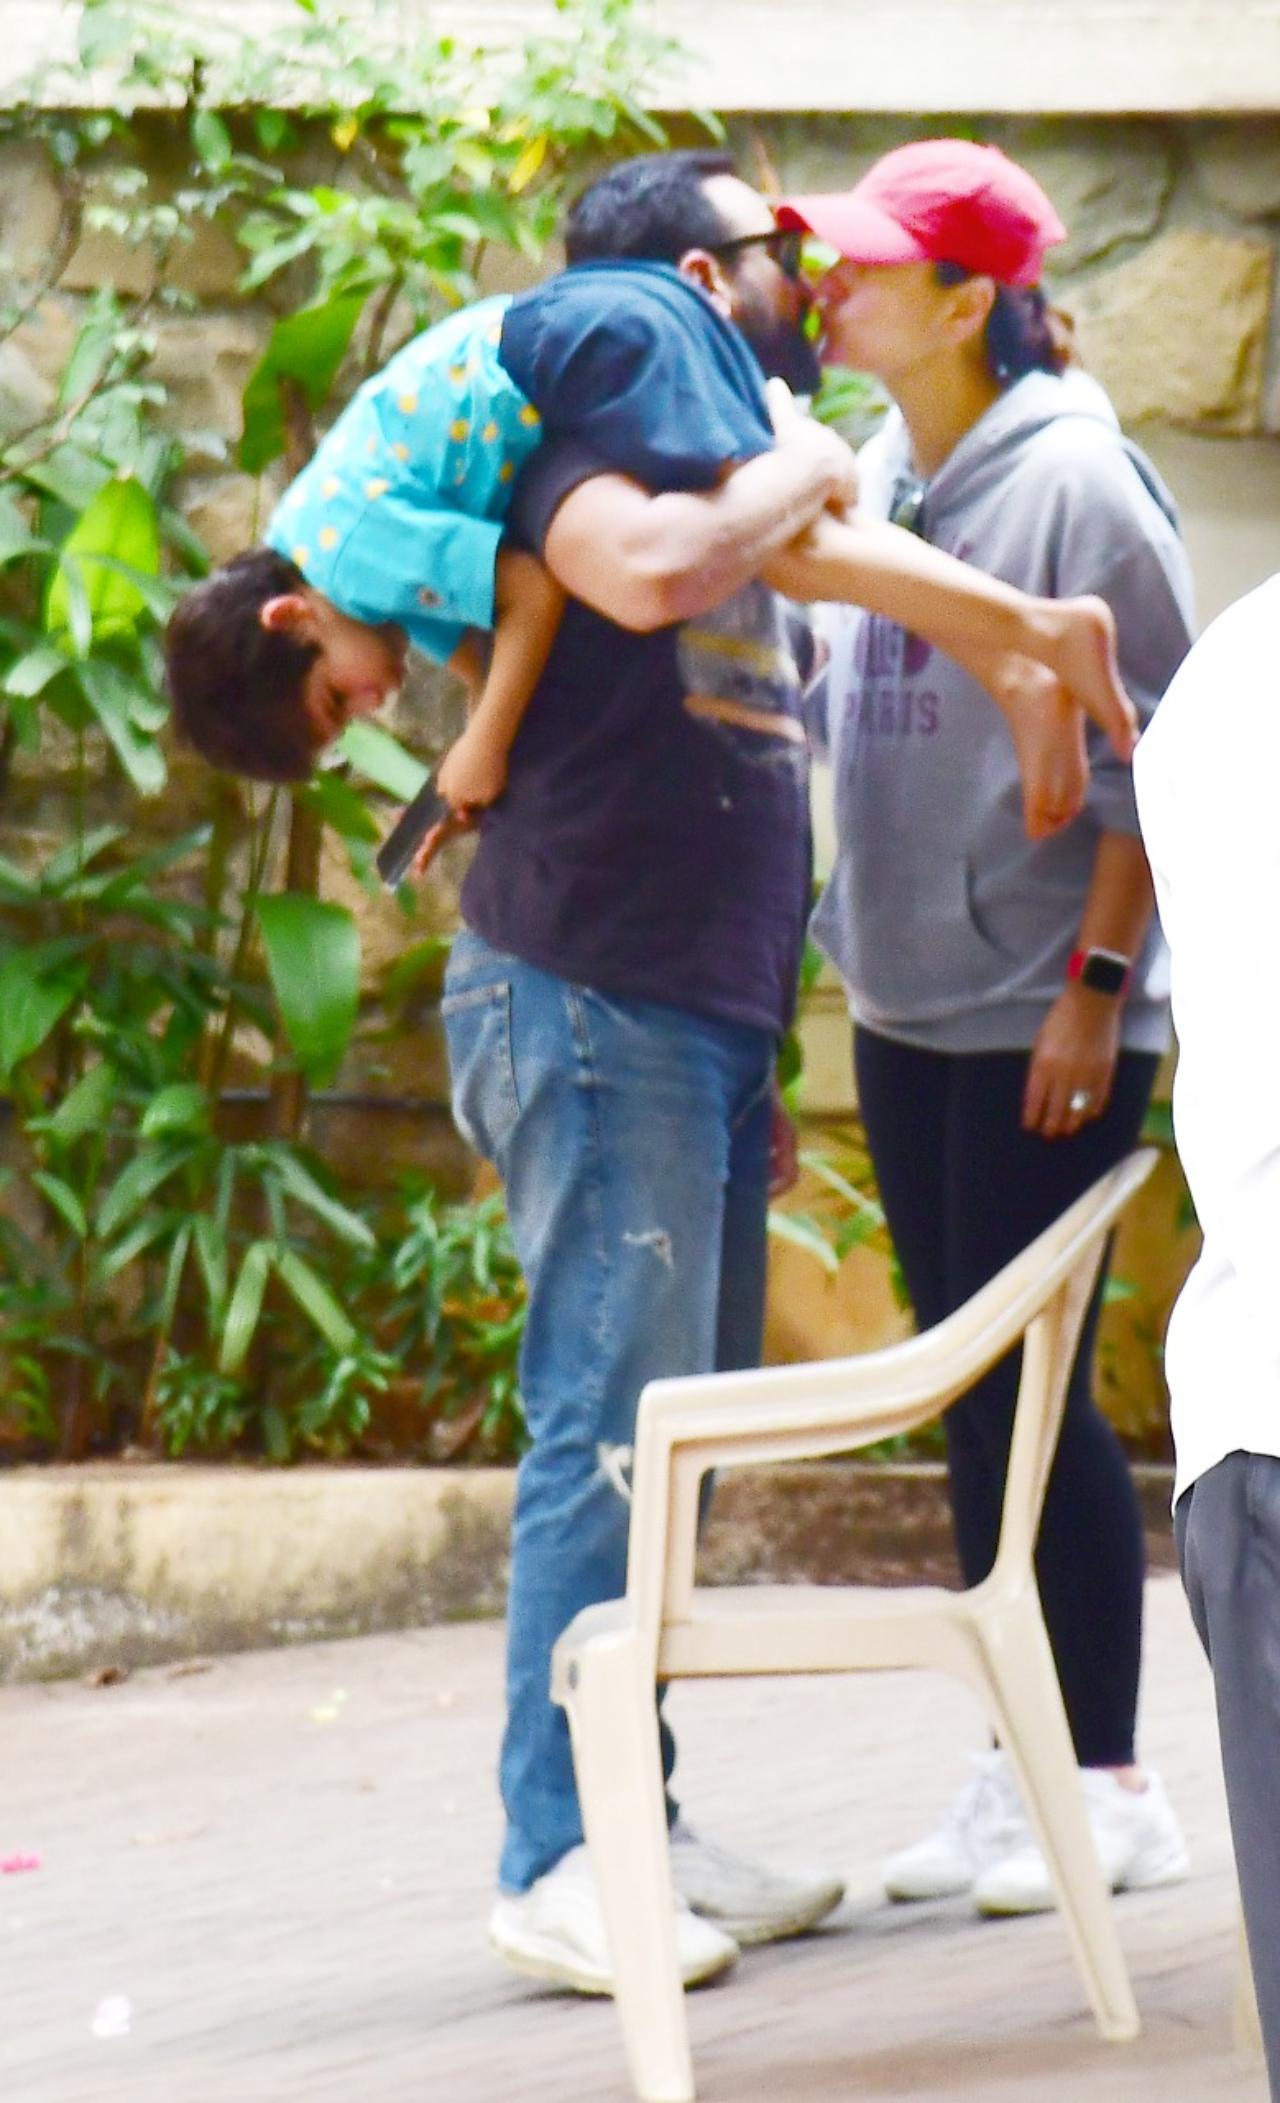 Meanwhile, Saif and Kareena were captured by the paparazzi having a PDA moment. However, it was Taimur who stole the limelight with him being lodged on Saif's shoulder and being immersed in his phone